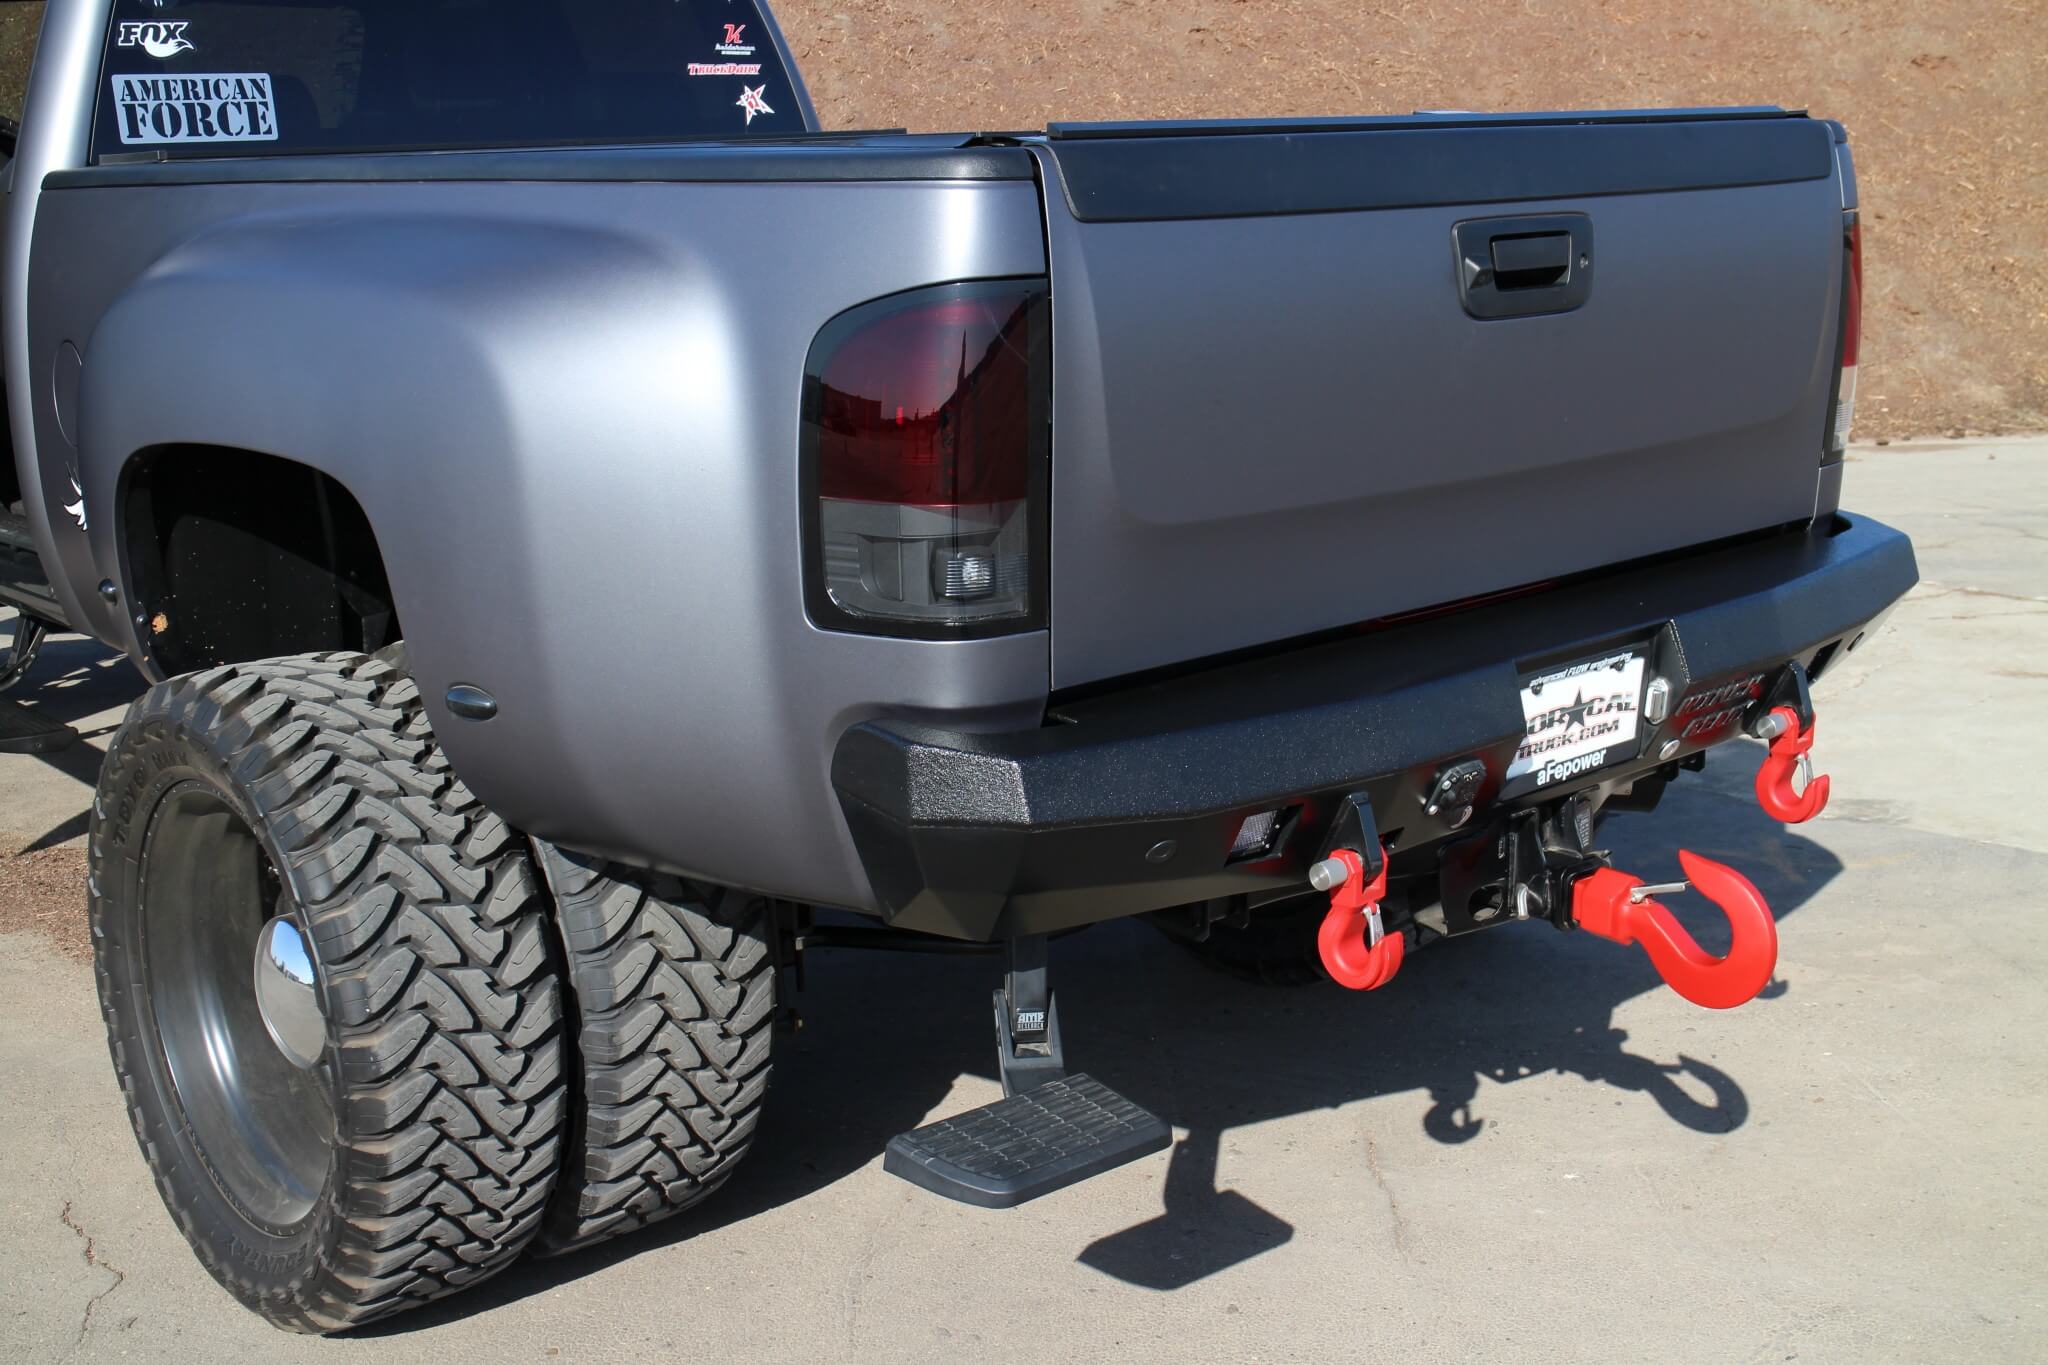 A snug-fitting Winch Ready rear bumper was equipped with a pair of Monster recovery hooks. To gain easier access to the bed, an AMP Research retractable bed step was installed. A larger Monster recovery hook was stuffed and secured into the trailer hitch receiver. 